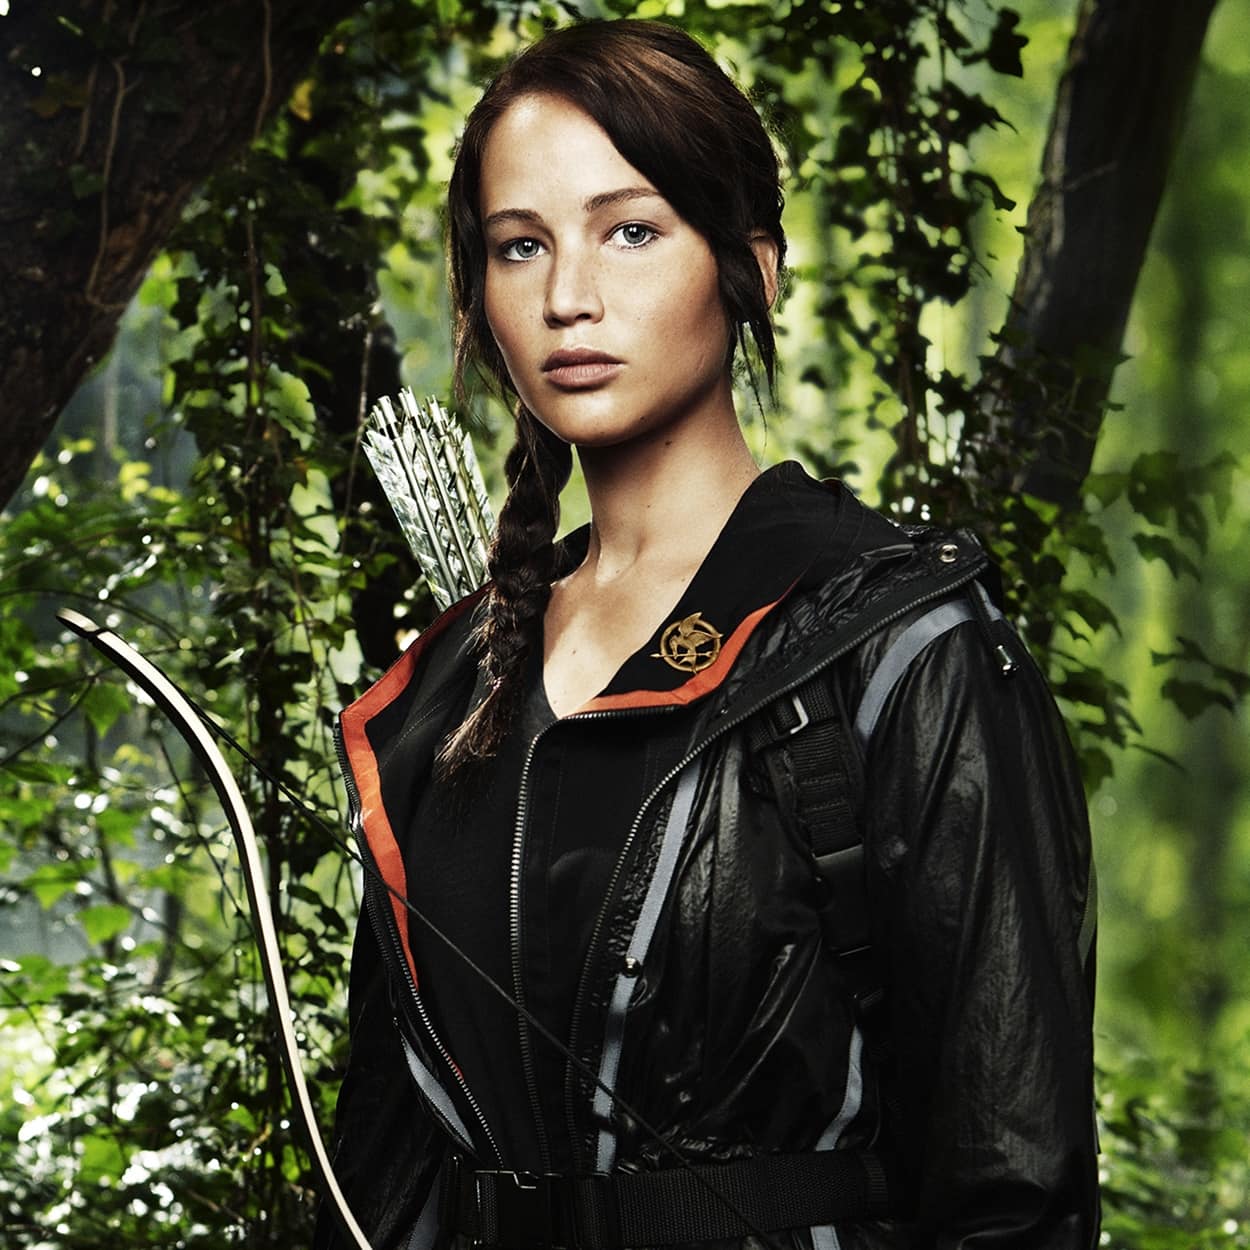 Jennifer Lawrence as Katniss Everdeen wears the Mockingjay pin in the 2012 American dystopian action film The Hunger Games